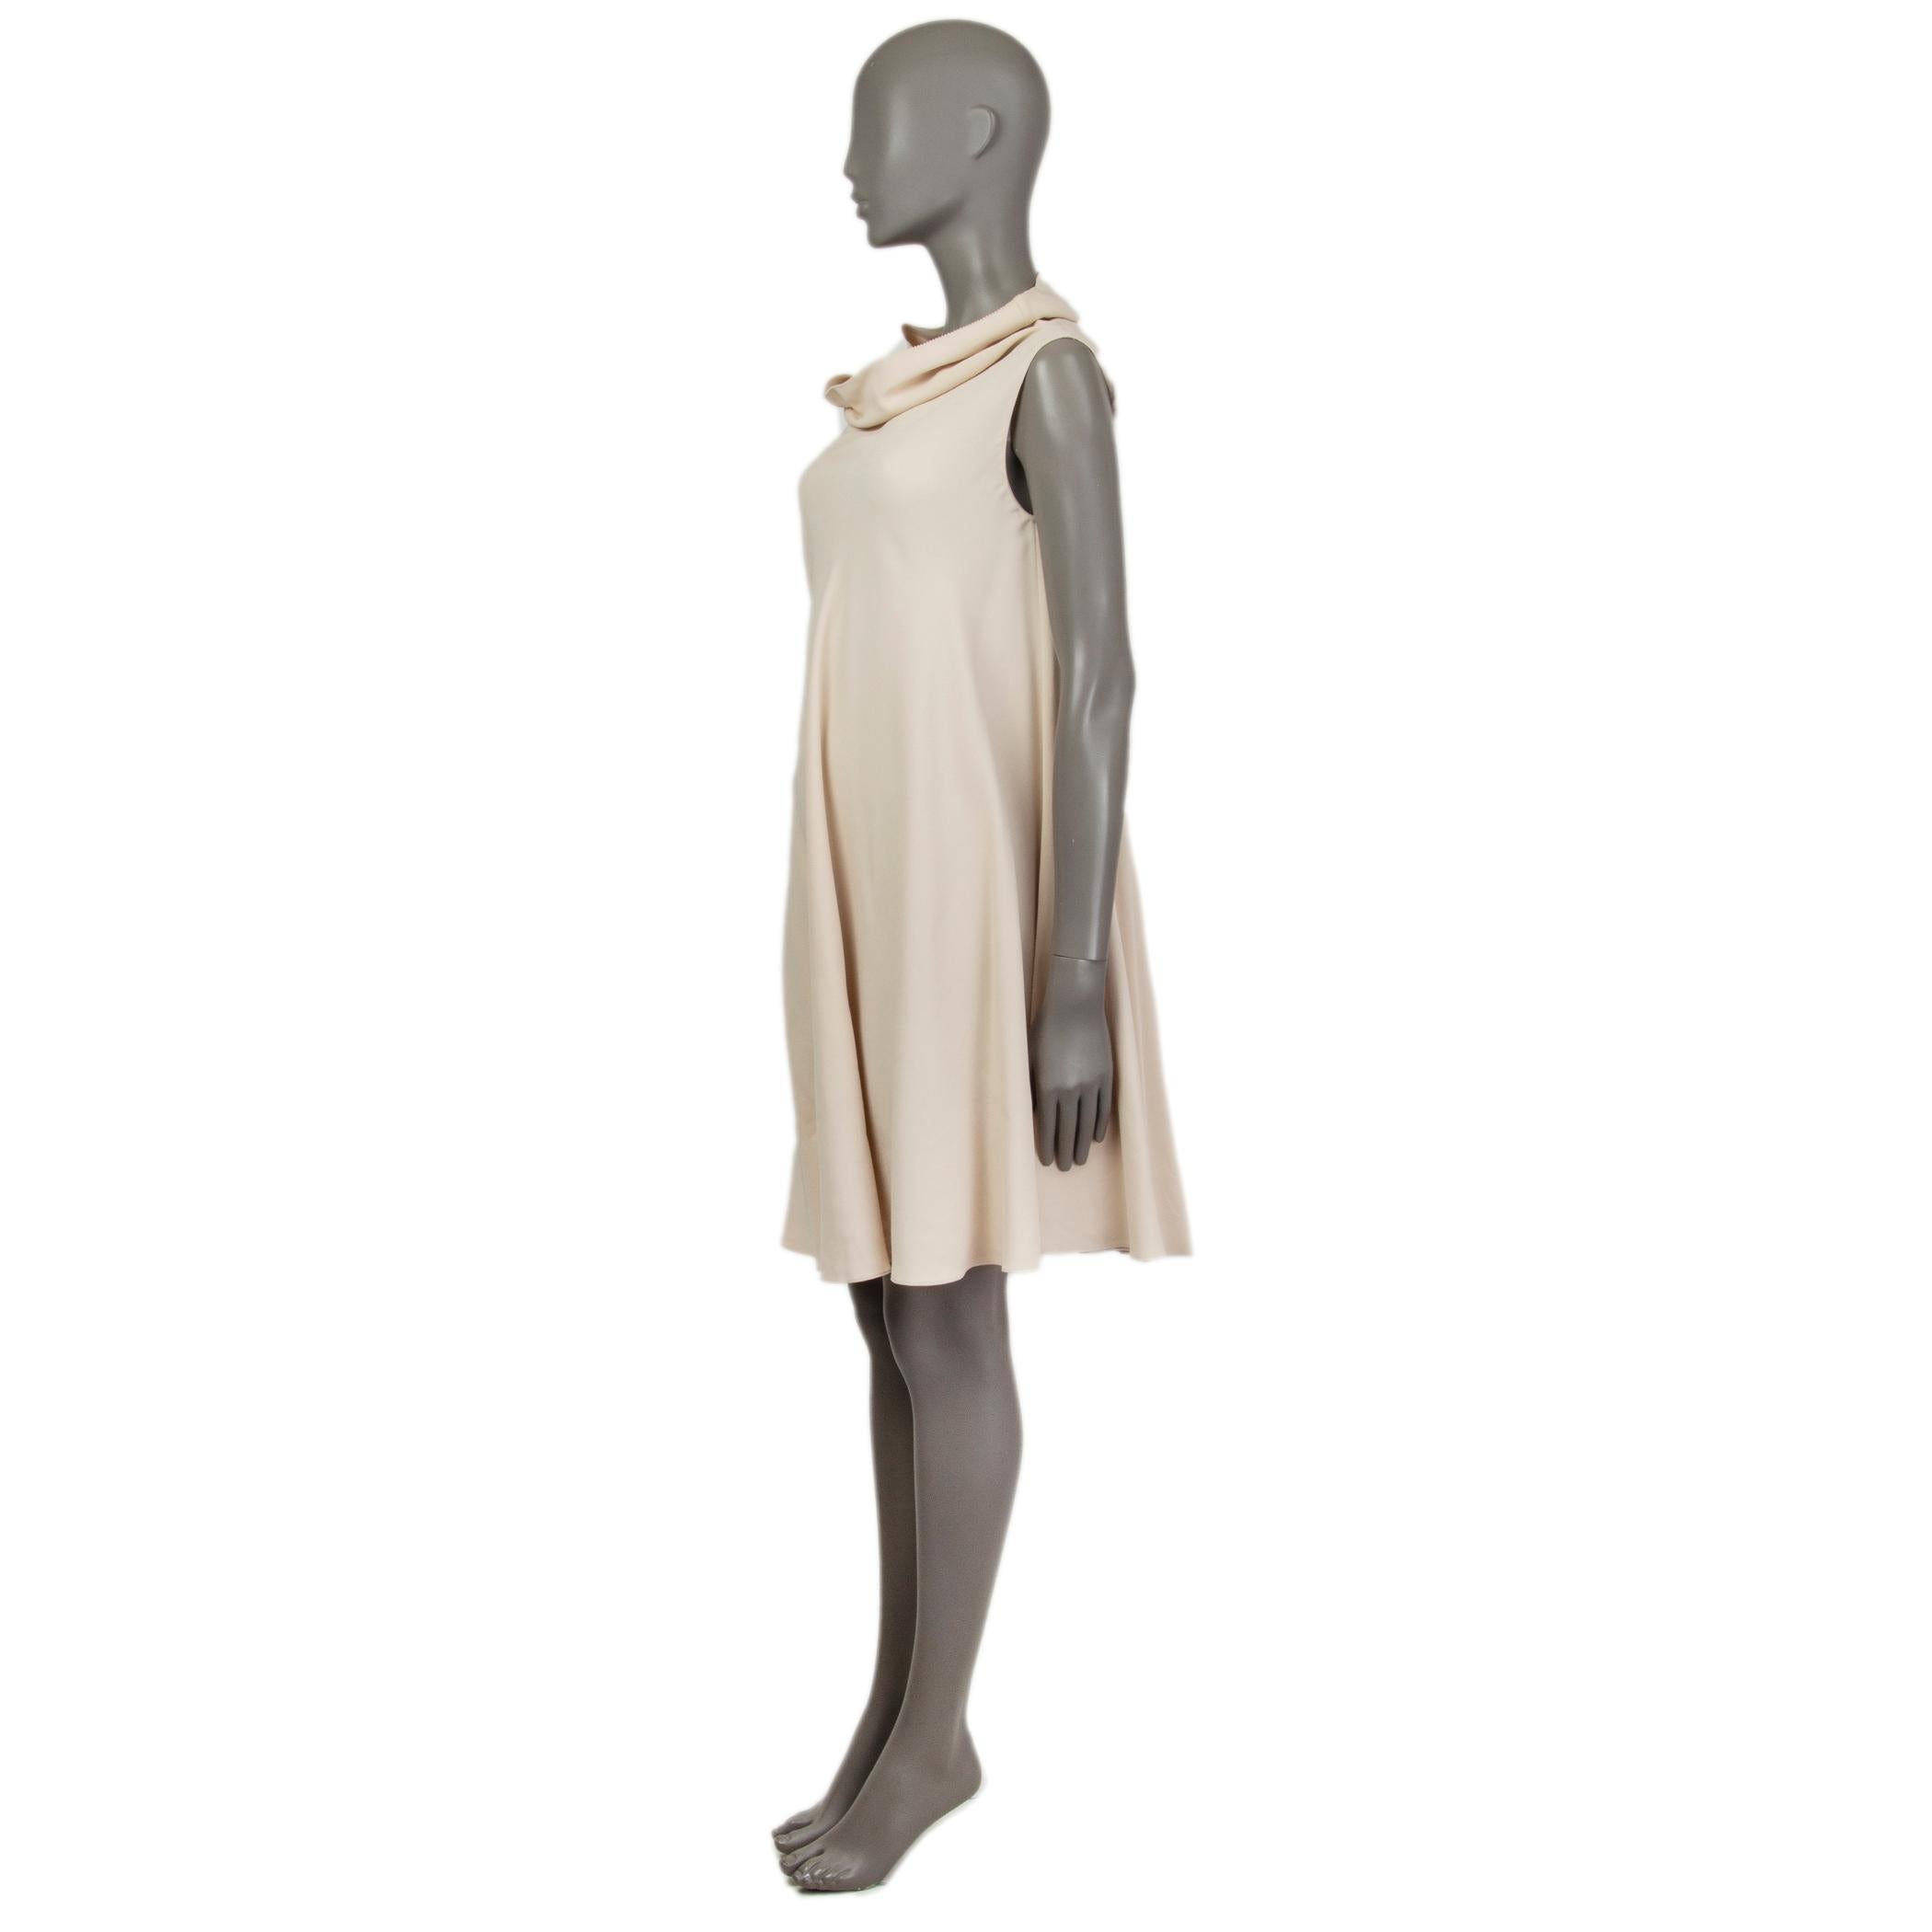 The Row tent dress in light beige viscose (95%) and elastane (5%). With cowl neck and two slit pockets on the sides. Unlined. Has been worn and is in excellent condition. 

Tag Size S
Size S
Bust 100cm (39in) to 116cm (45.2in)
Waist 140cm (54.6in)